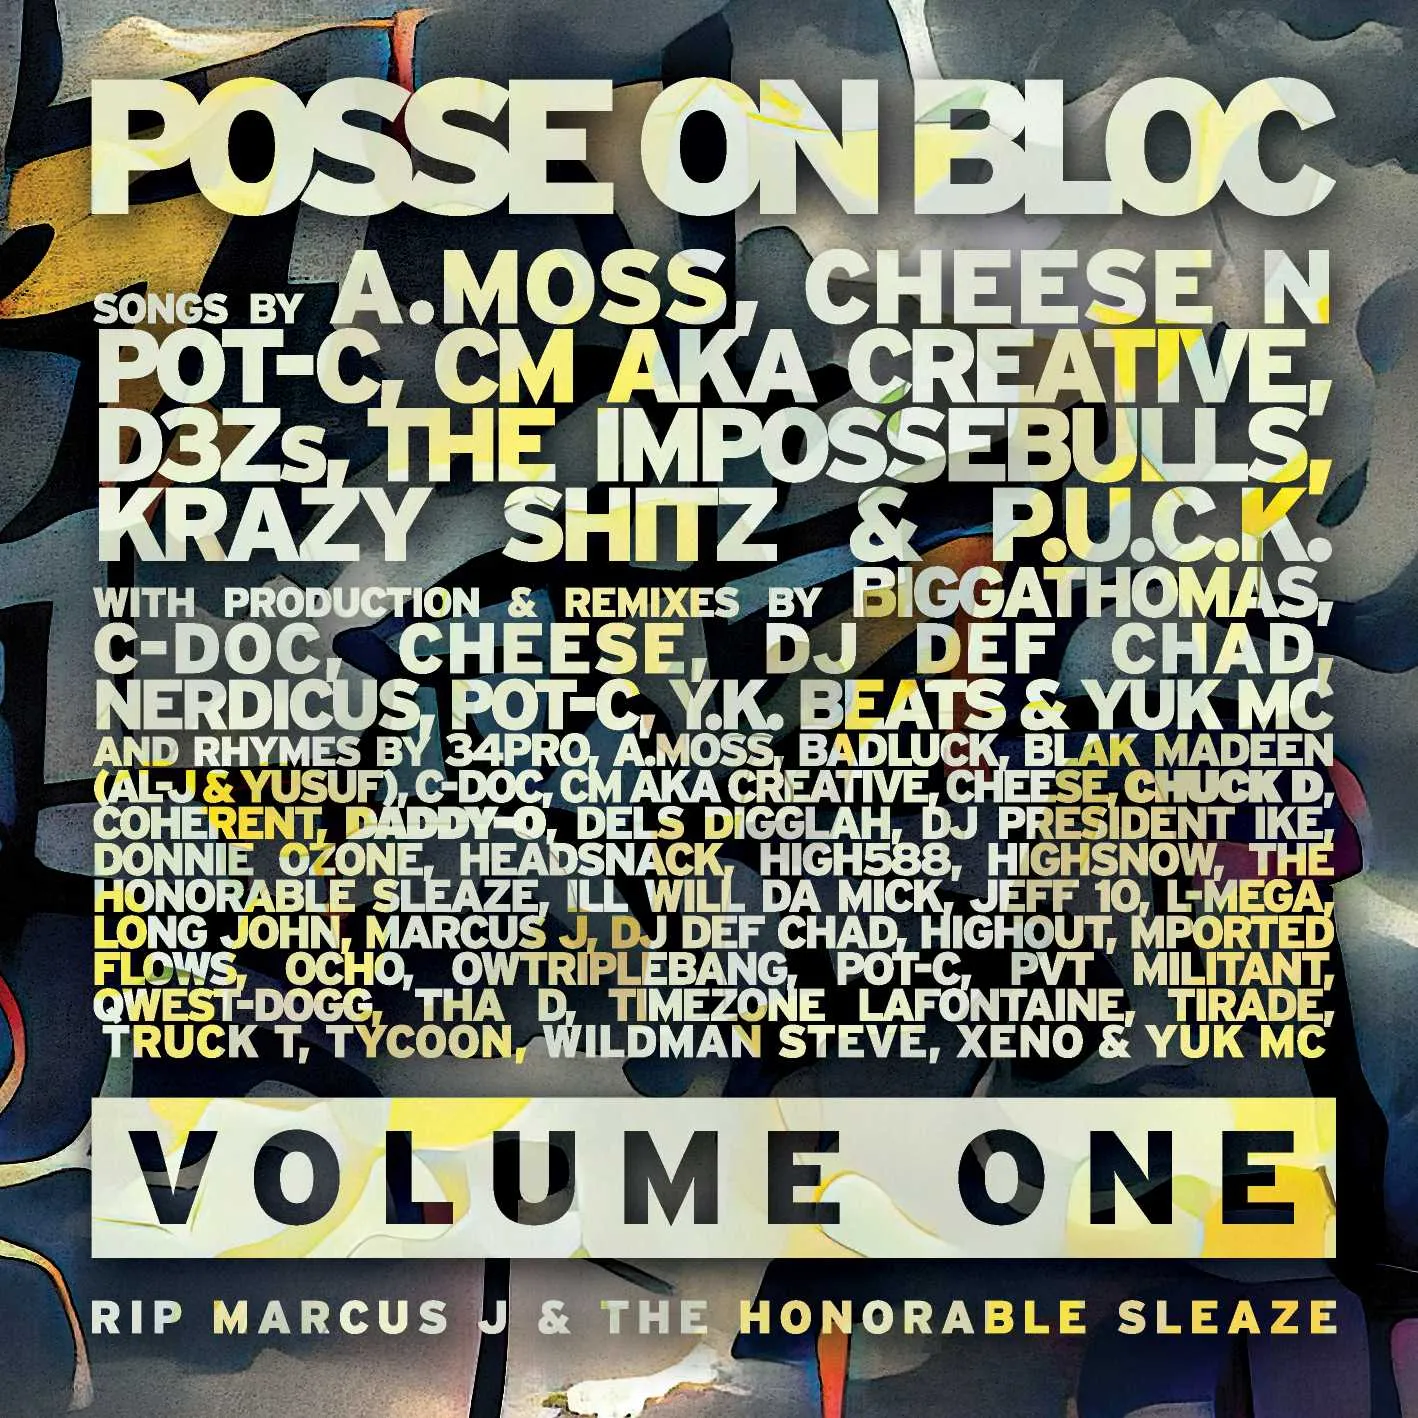 Album cover for “Posse On Bloc, Volume One (blocSonic Posse Cuts, So Far)” by Various Artists